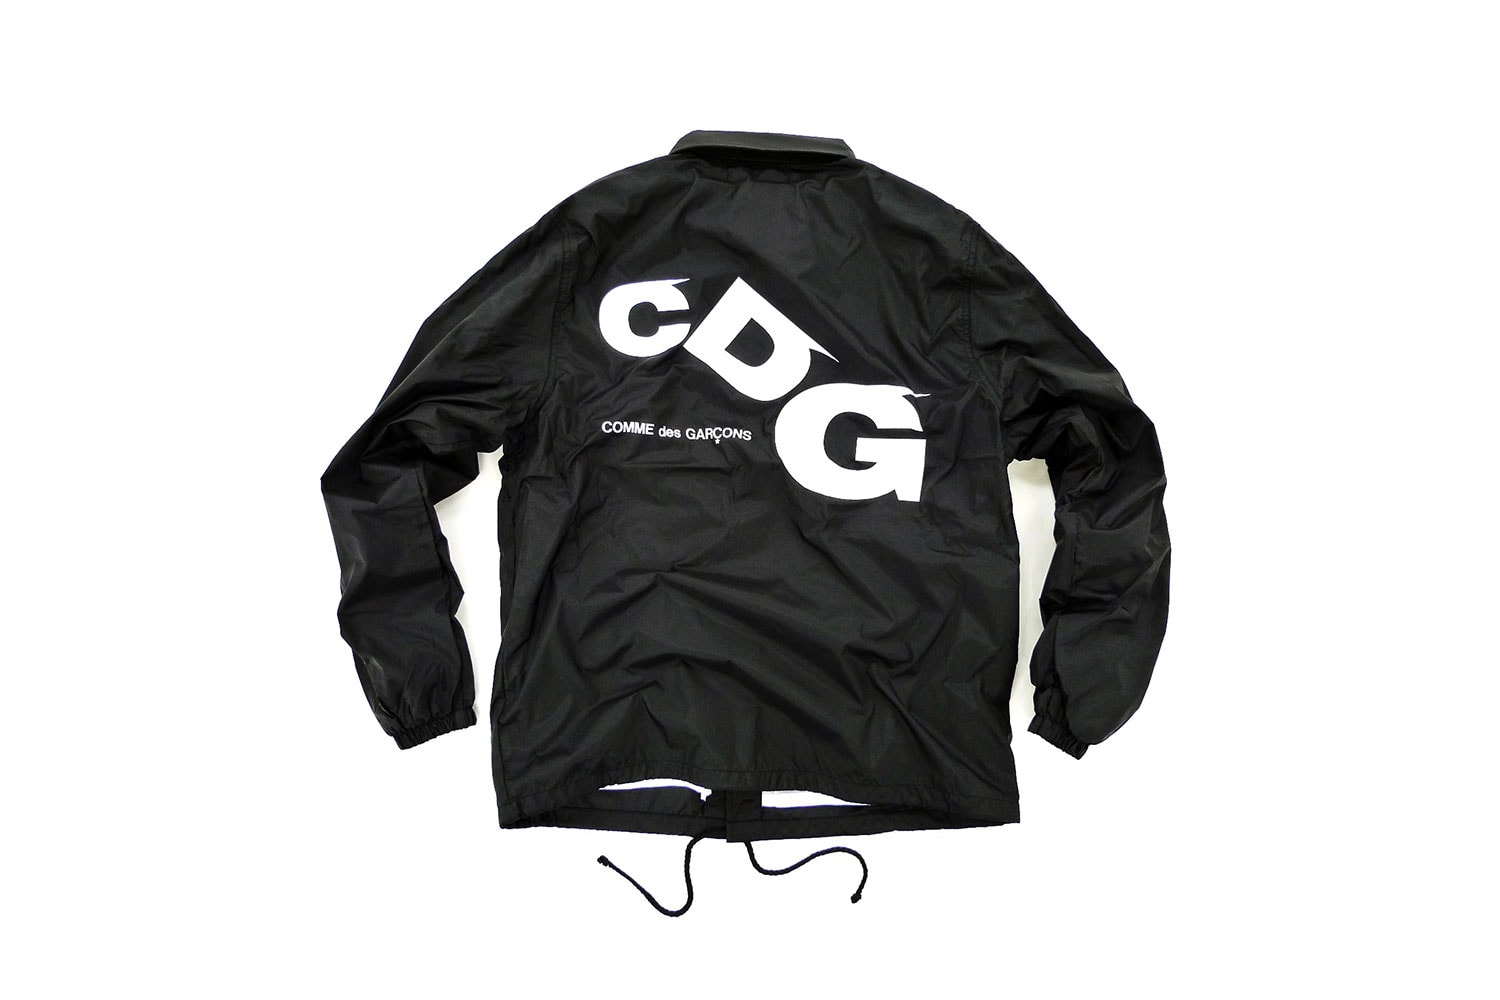 comme des garcons cdg pop-up store nagoya japan limited edition hoodies t-shirts address location 